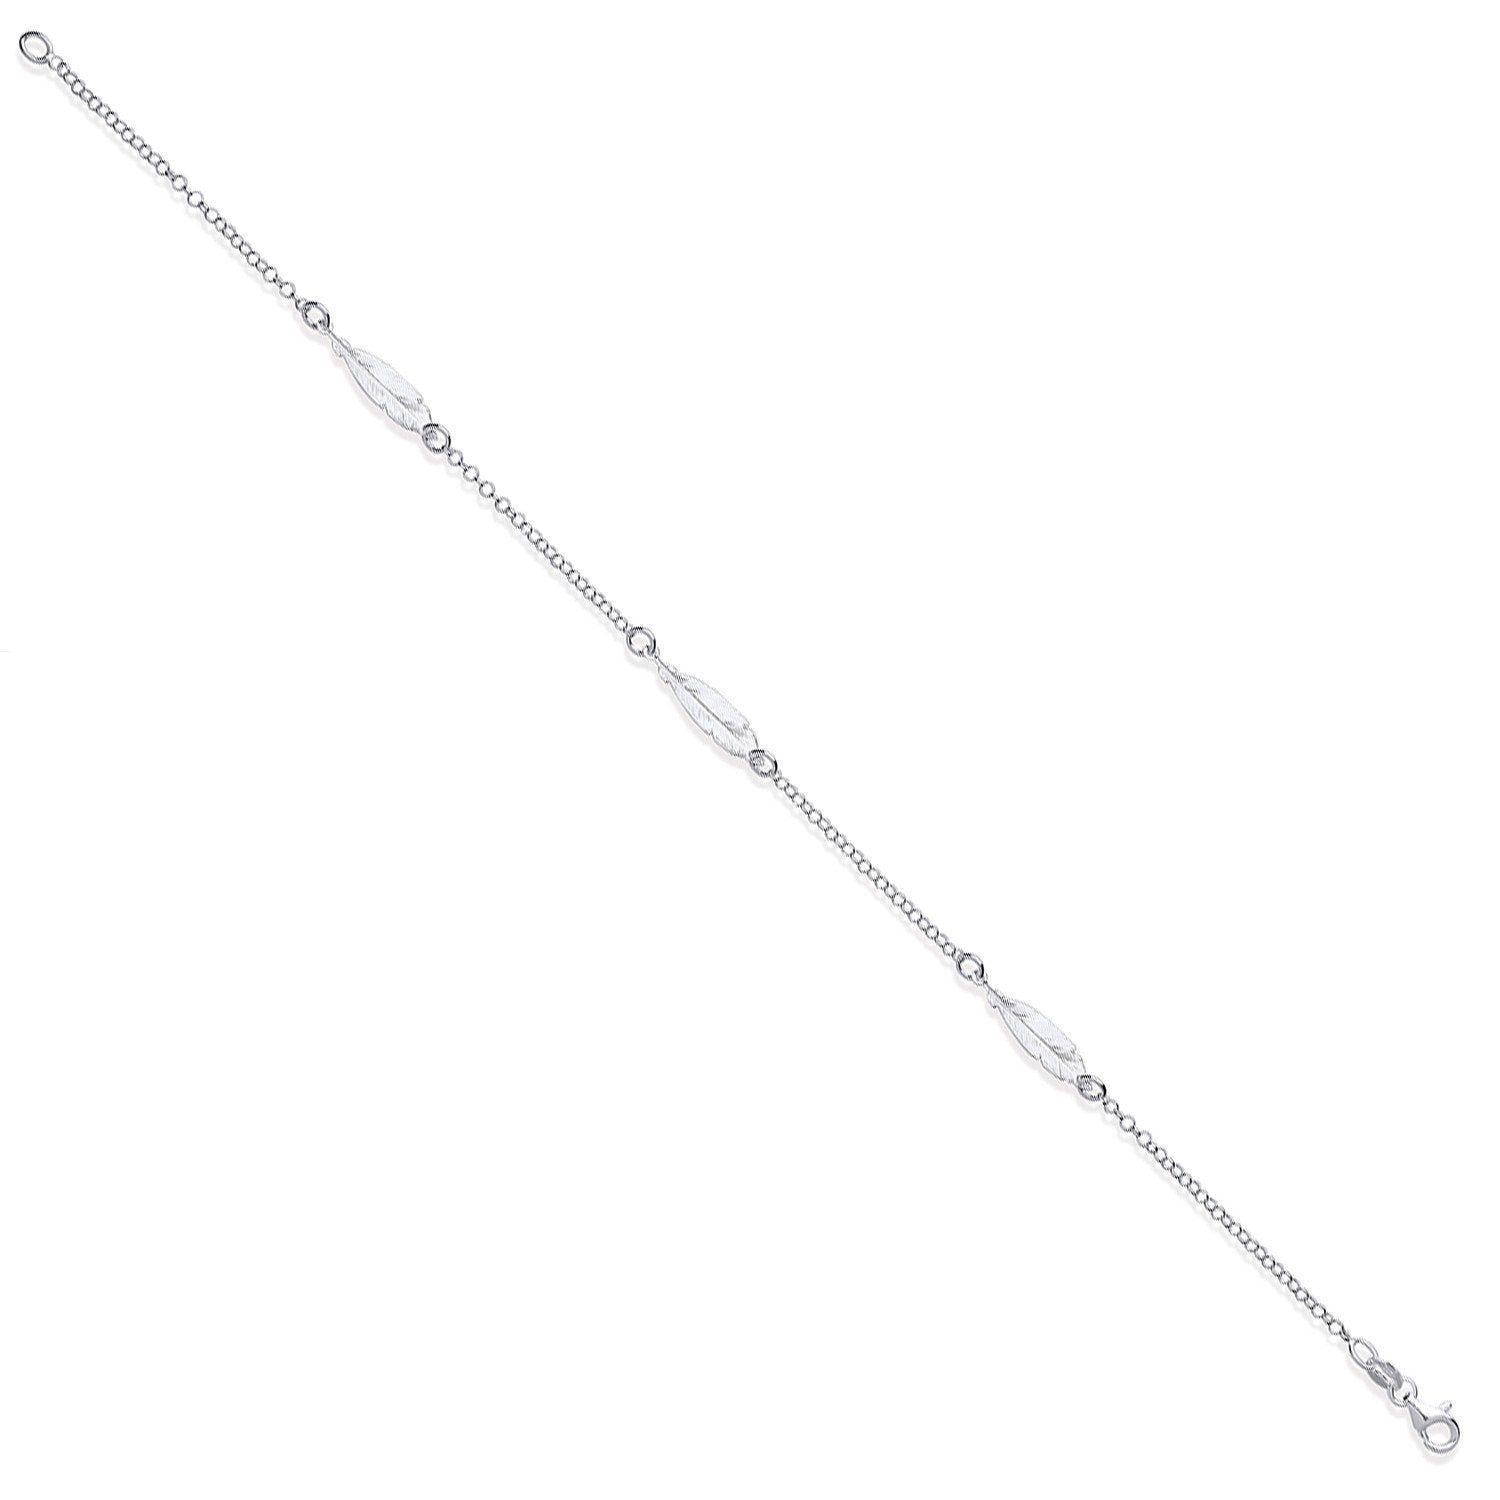 Silver Feather Anklet Anklet Hanron 